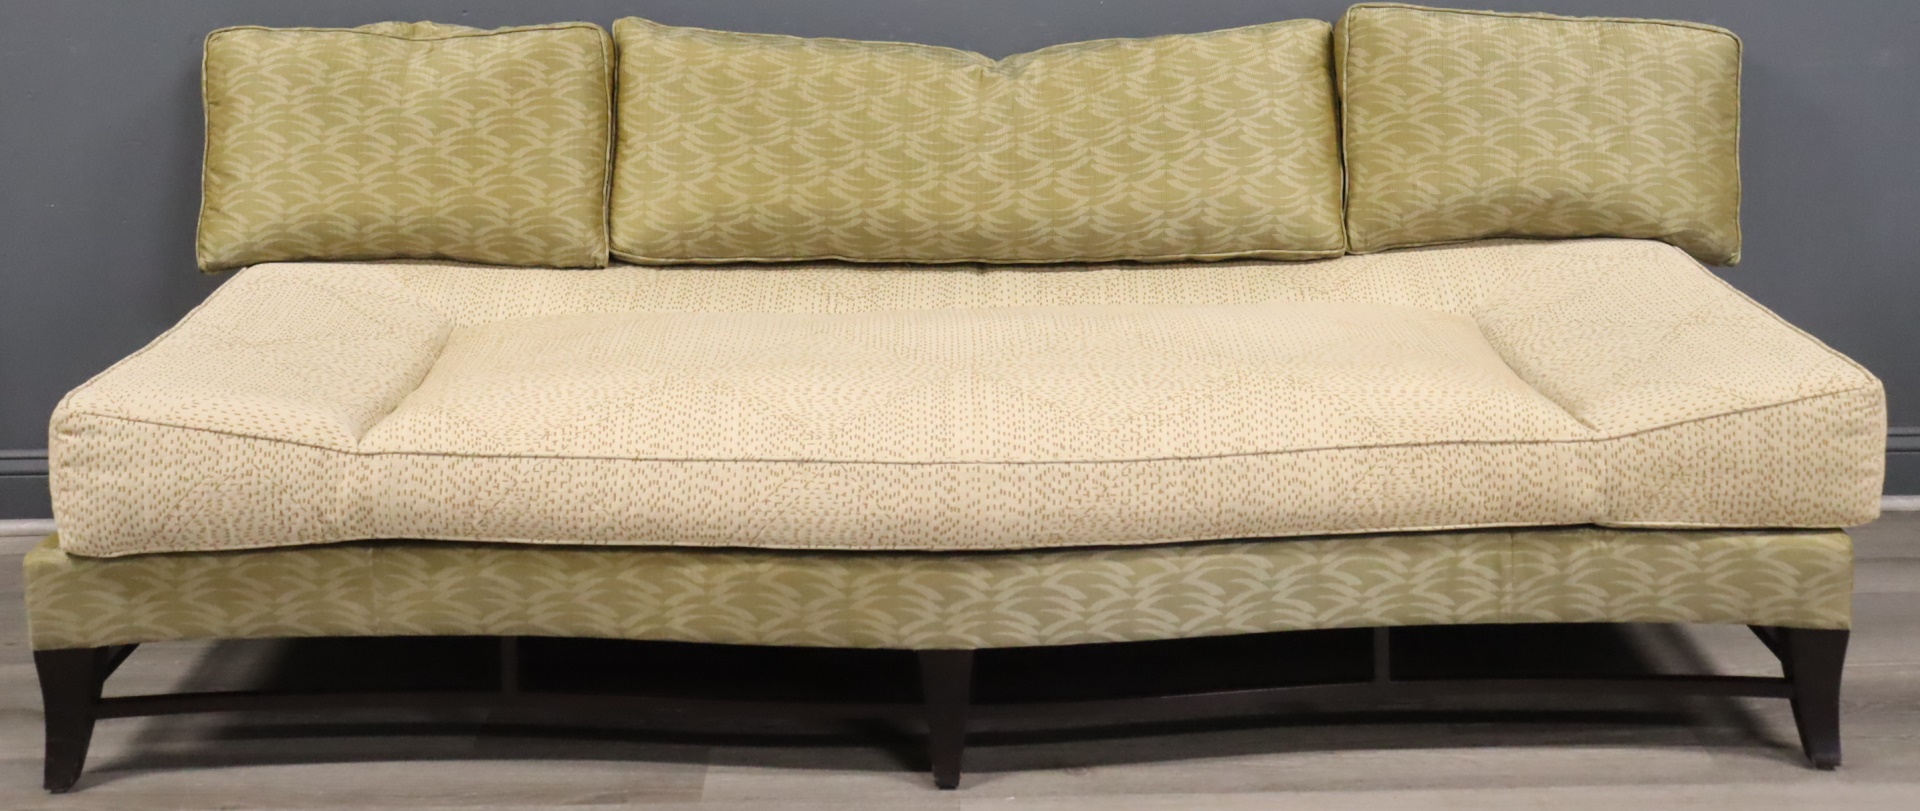 VINTAGE DONGHIA UPHOLSTERED DAY